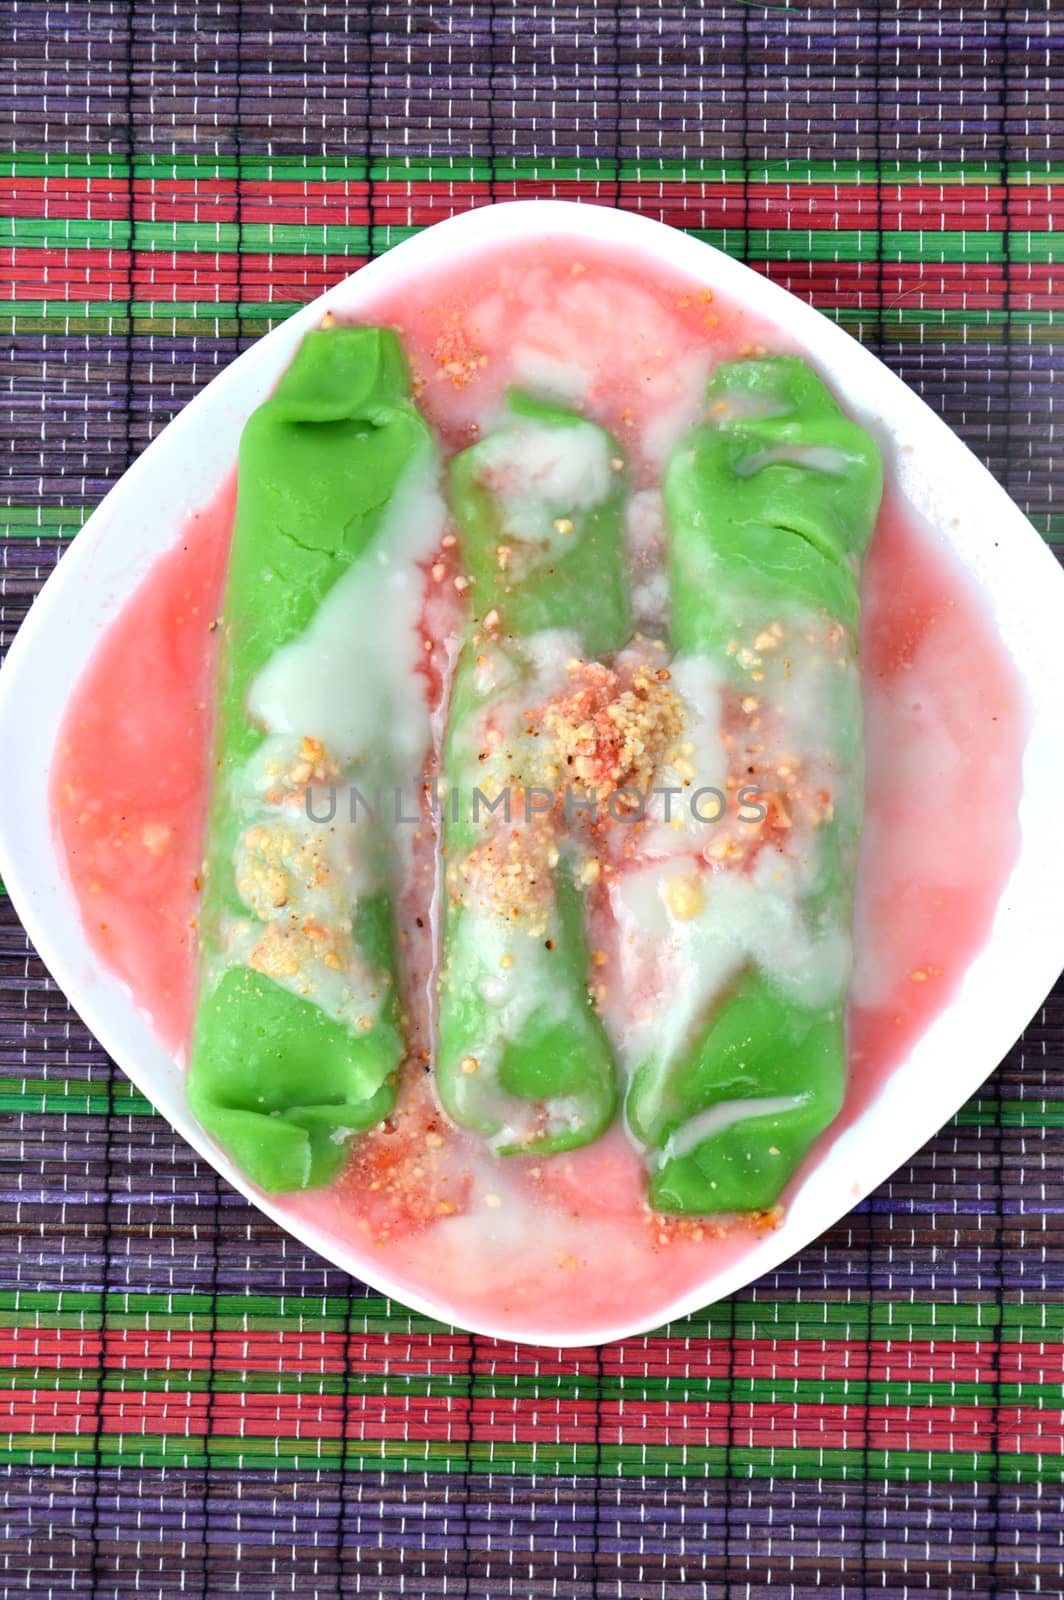 pisang ijo ice or green banana ice a tradisonal snack foods from ethnic Bugis or Makassar made of ripe banana pancakes wrapped in pandan leaf extract gravy with fla, syrup,milk and peanut powder